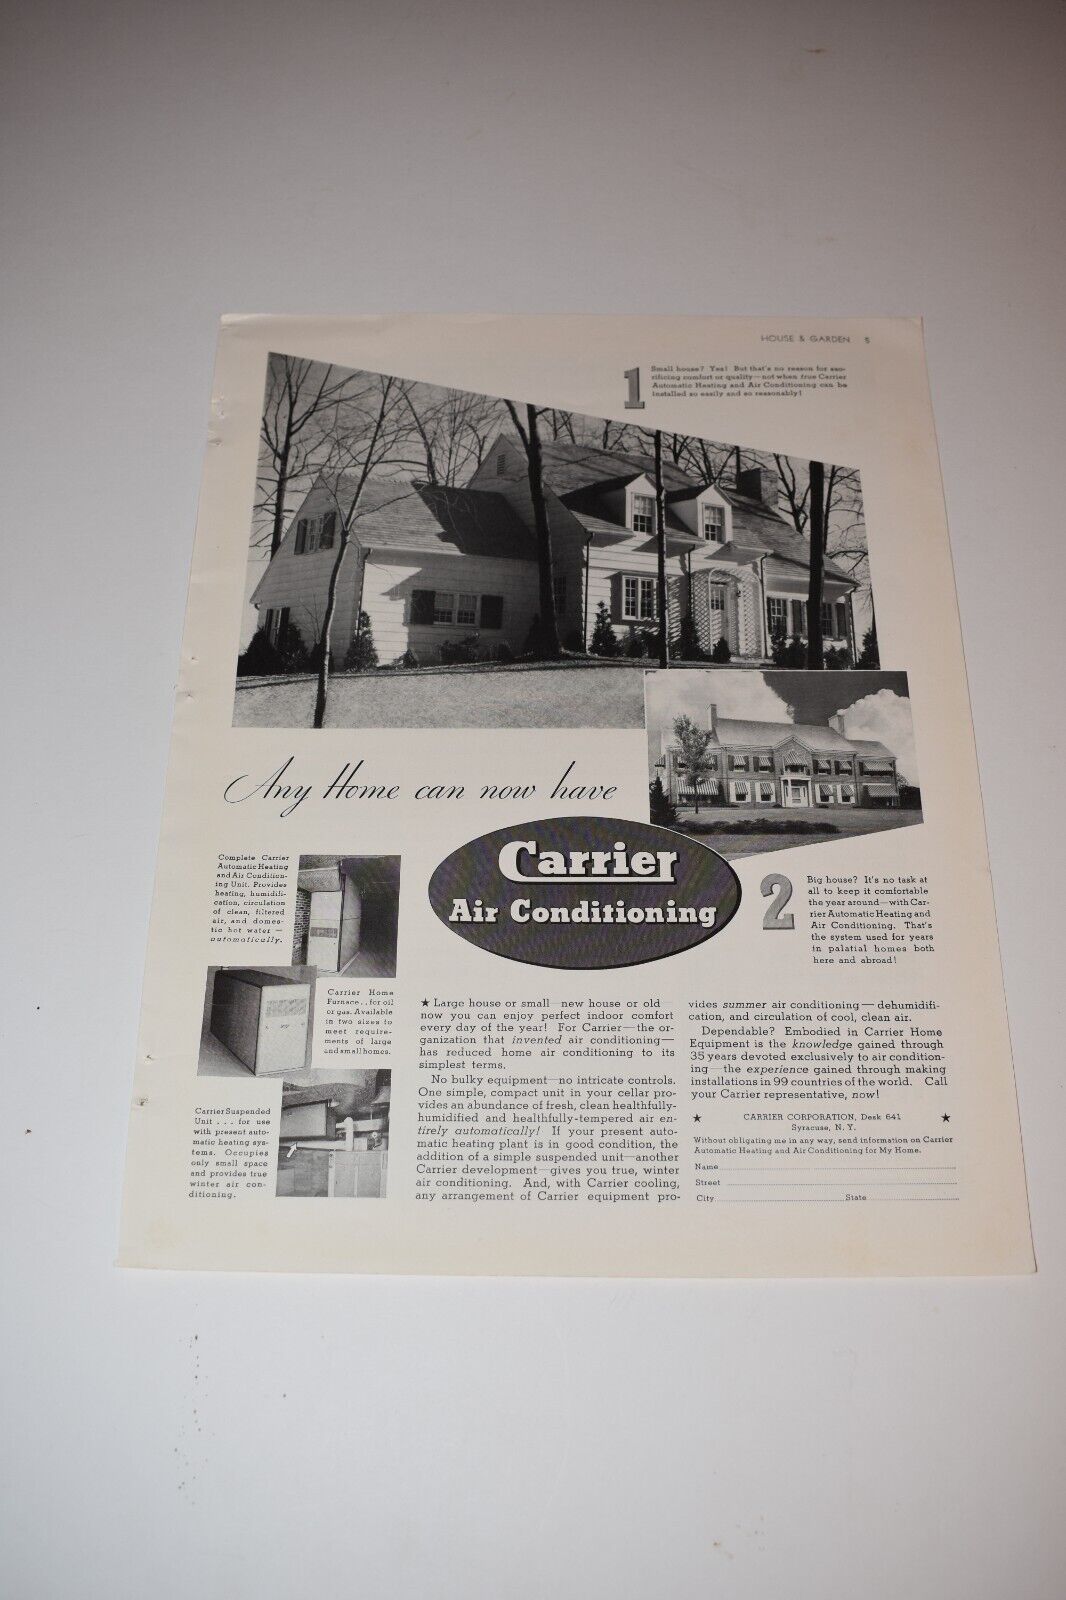 Vintage 1937 Carrier Air Conditioning ad. House & Garden Magazine